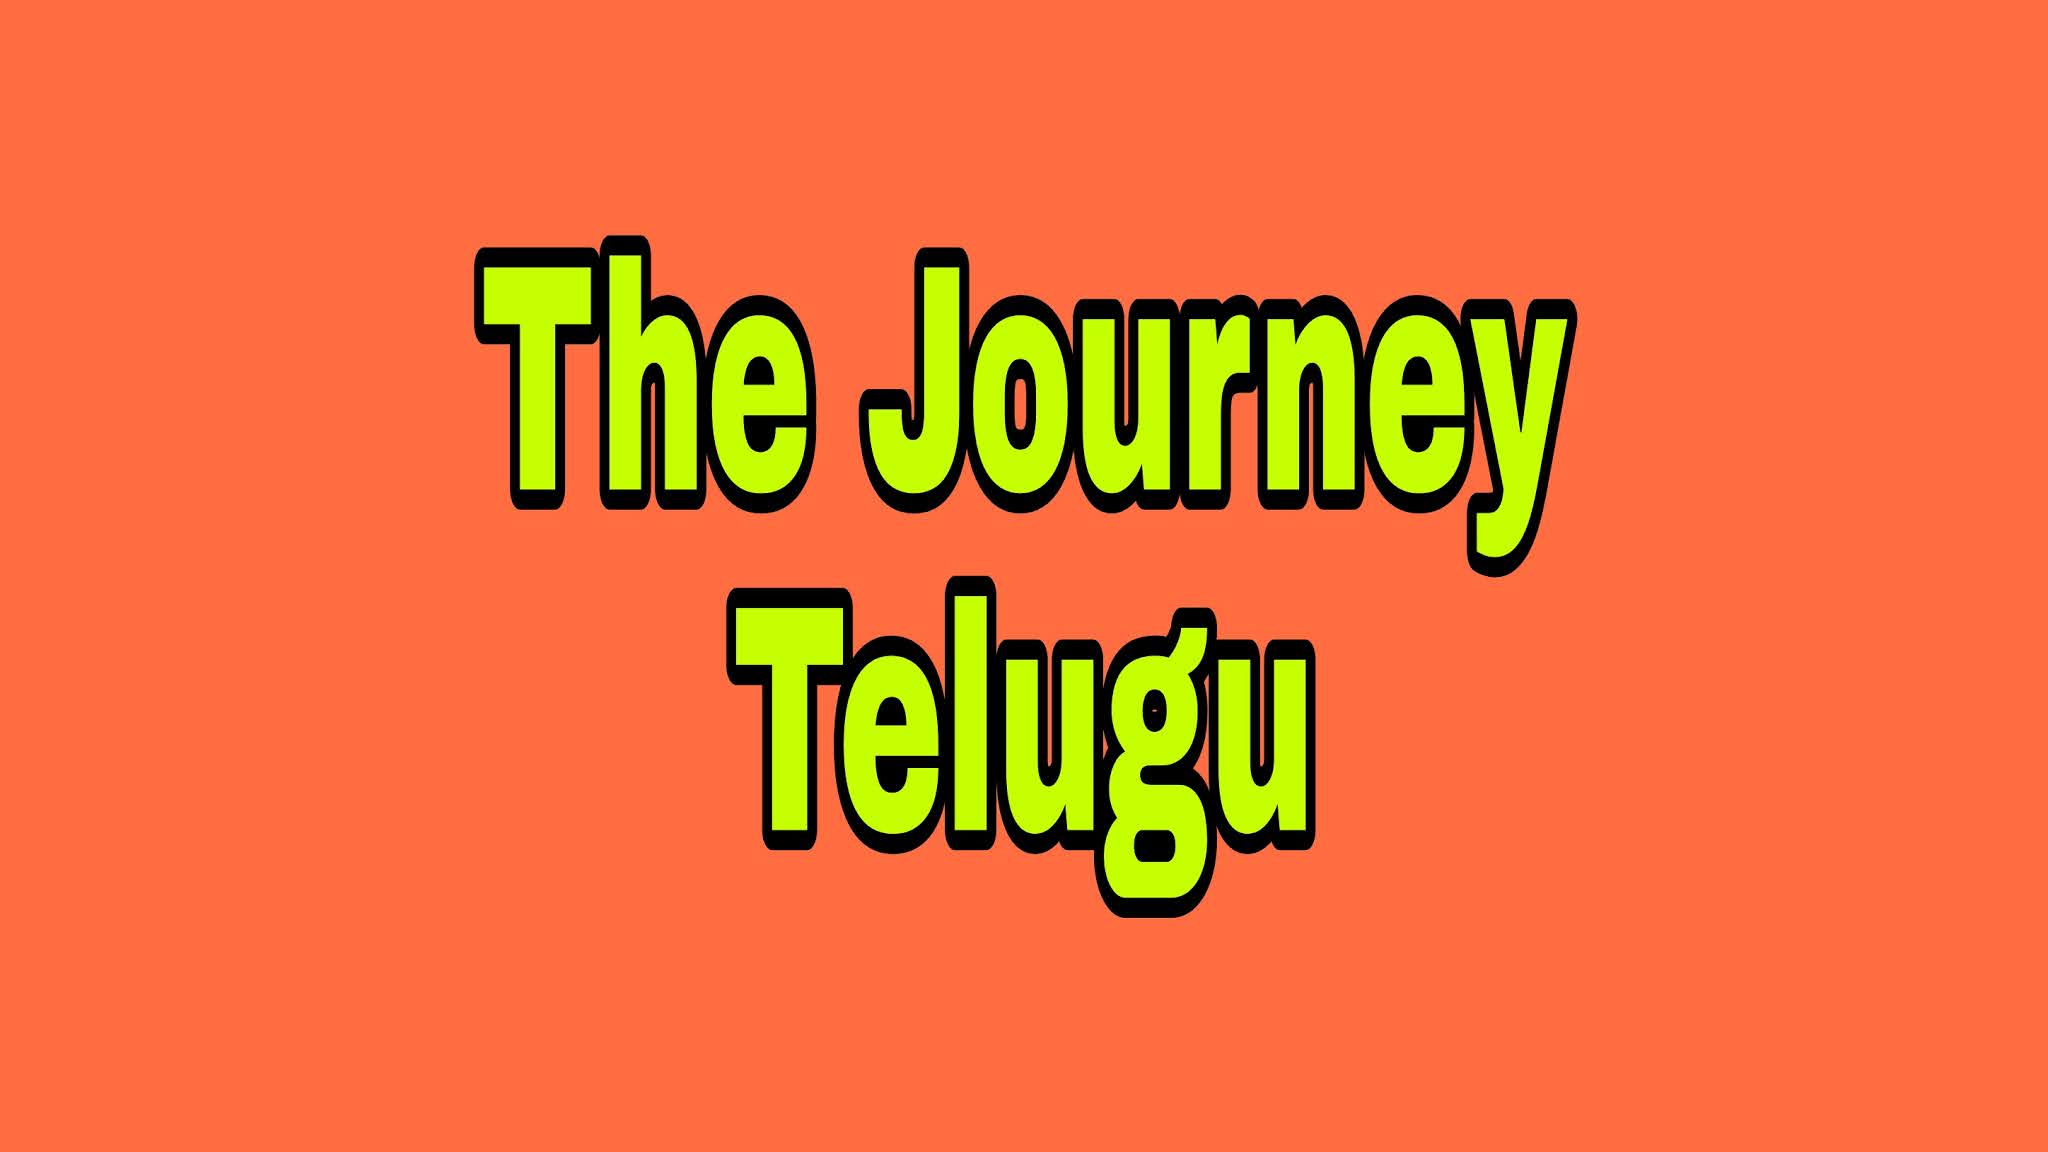 journey meaning in telugu